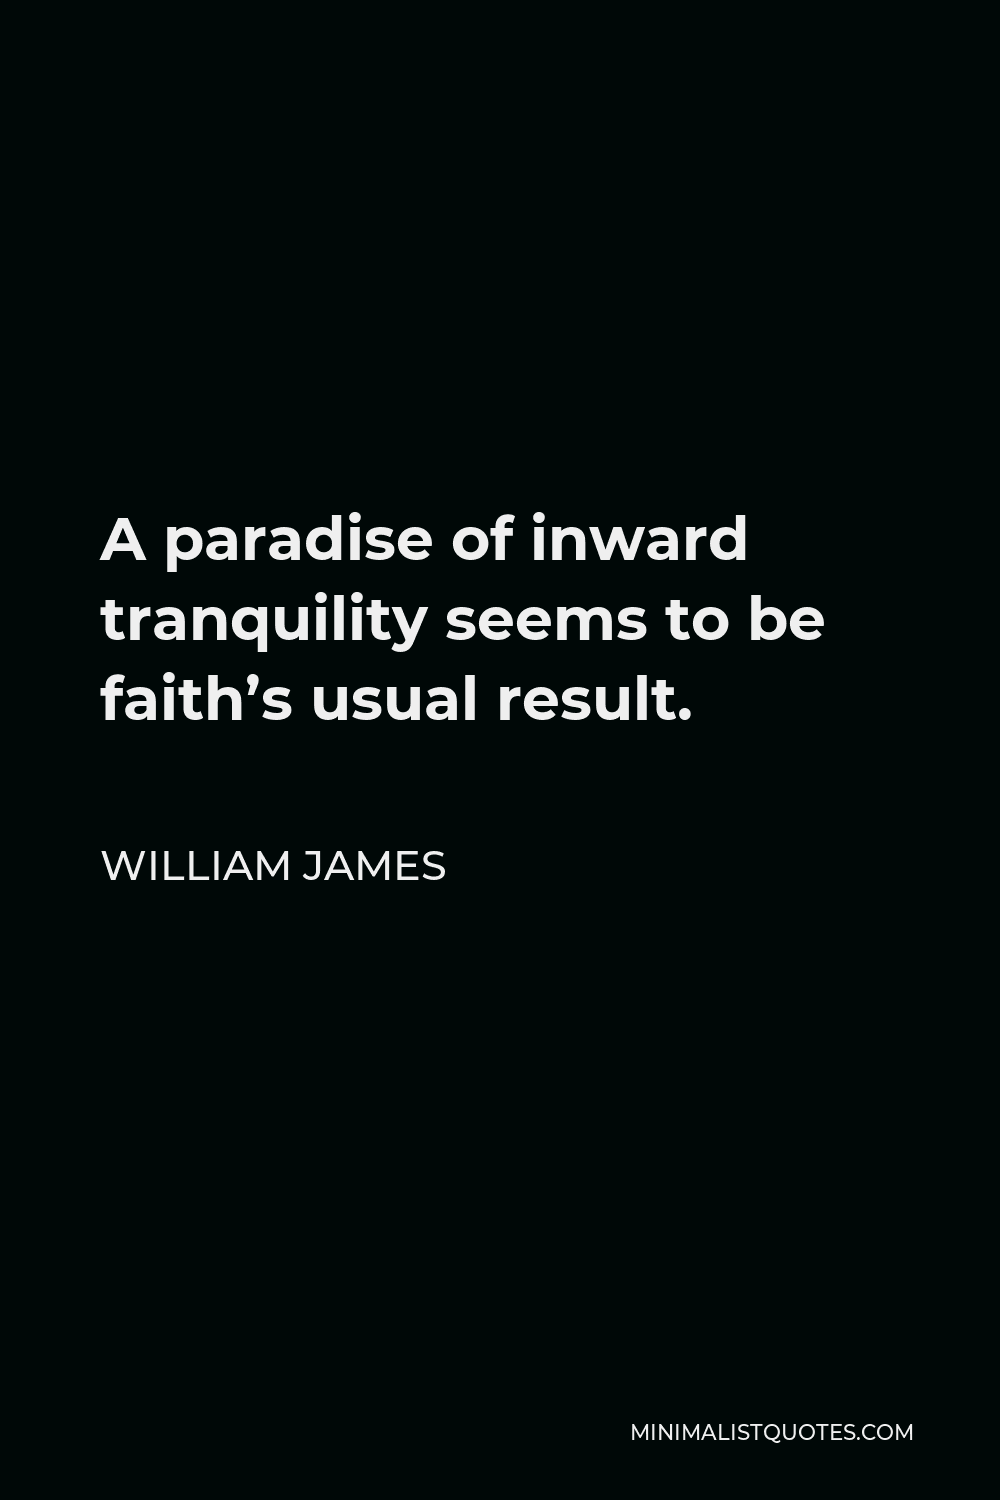 William James Quote - A paradise of inward tranquility seems to be faith’s usual result.